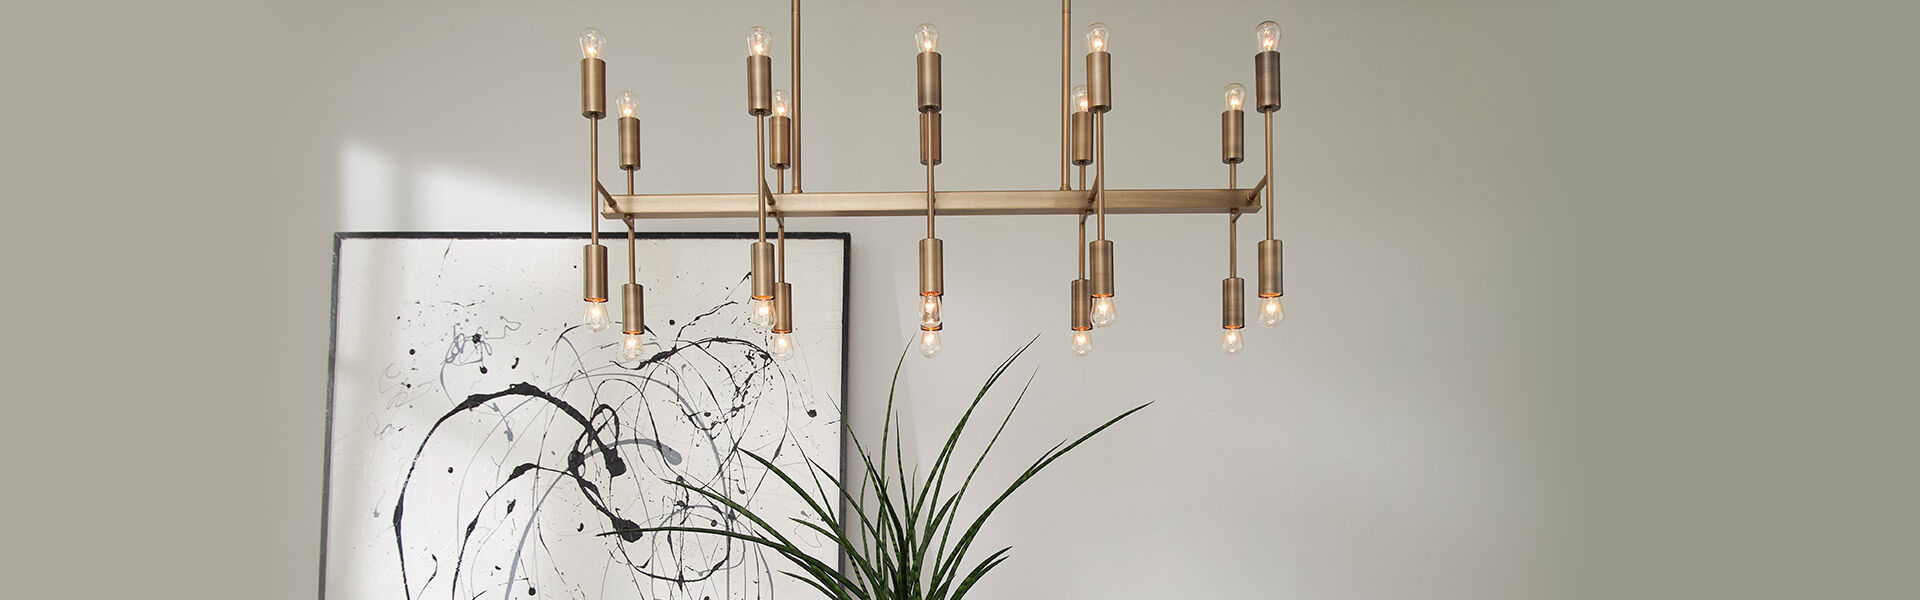 Trend Lighting | 20% Off Entire Line | ends 6.2